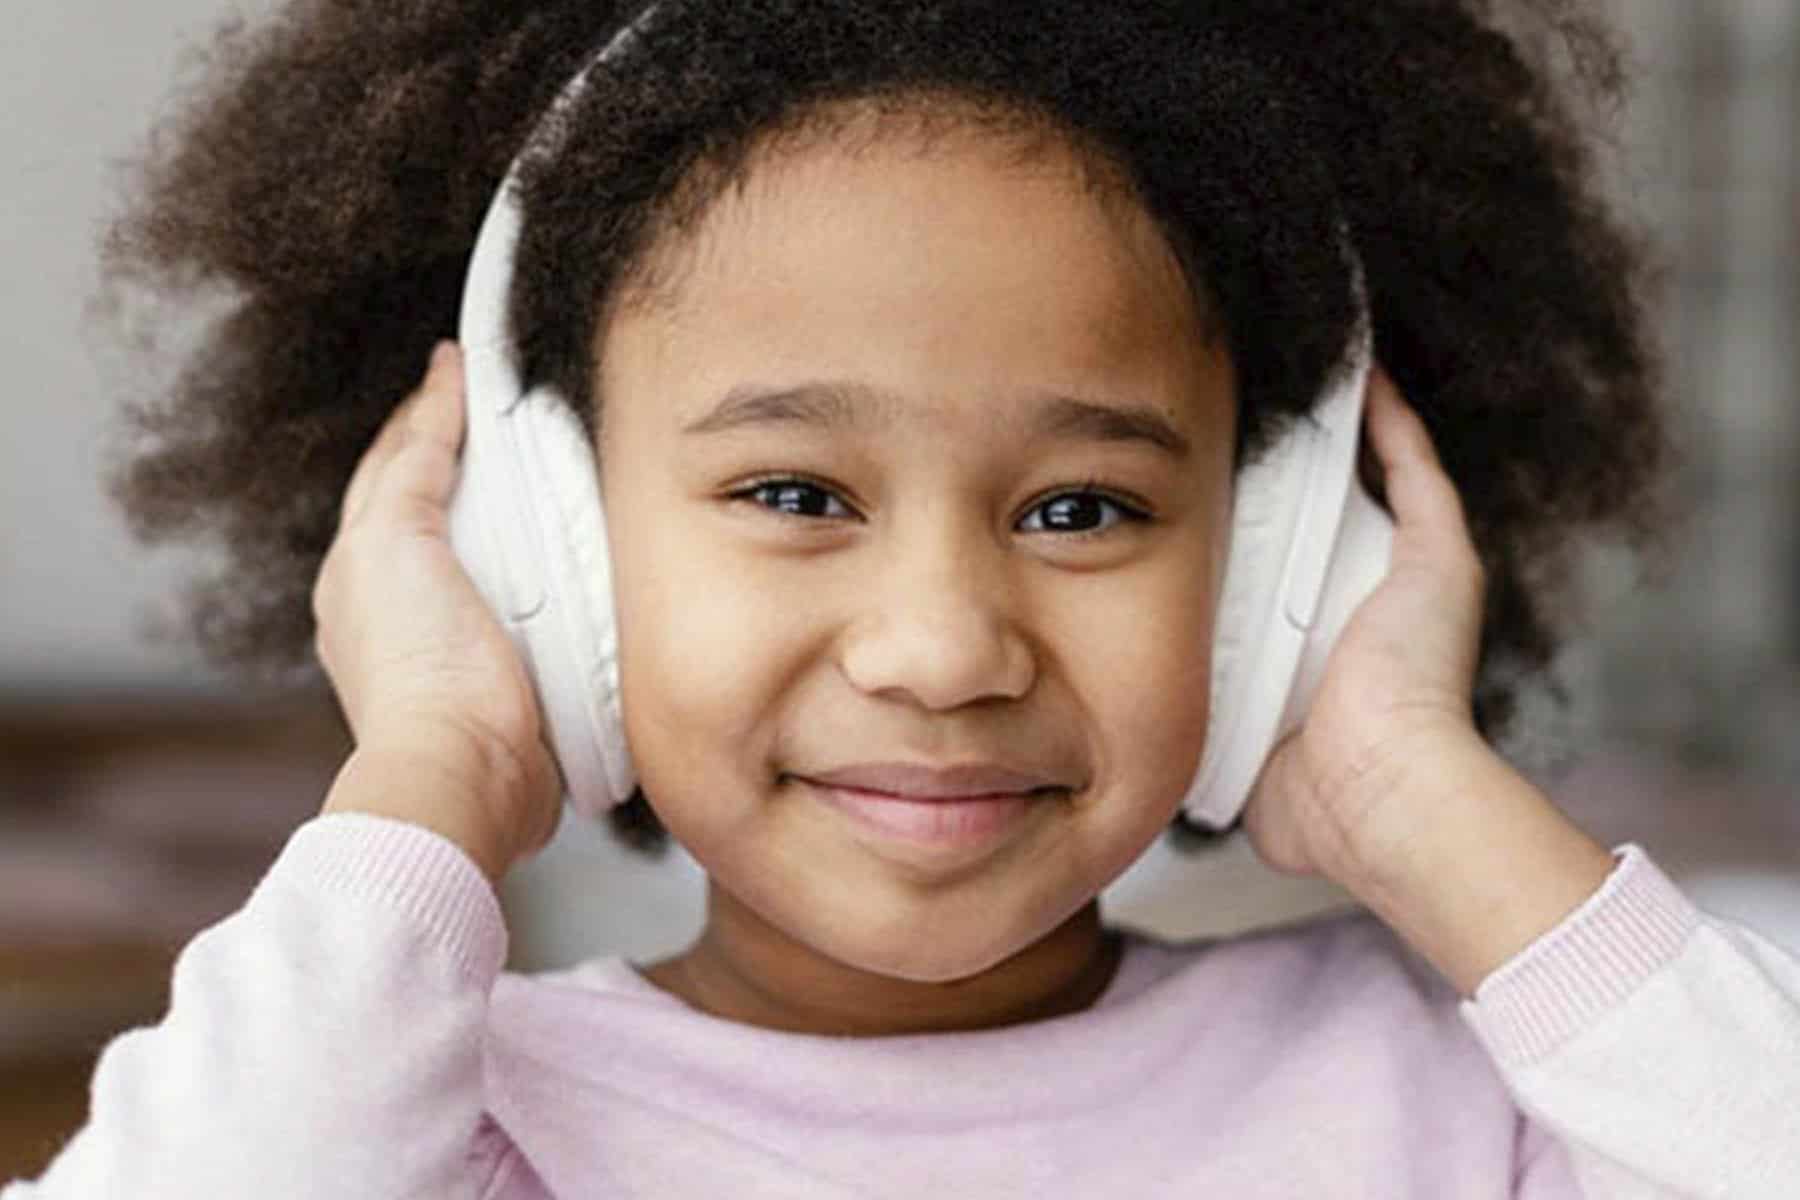 Too loud: 5 ways to prevent early hearing loss in children